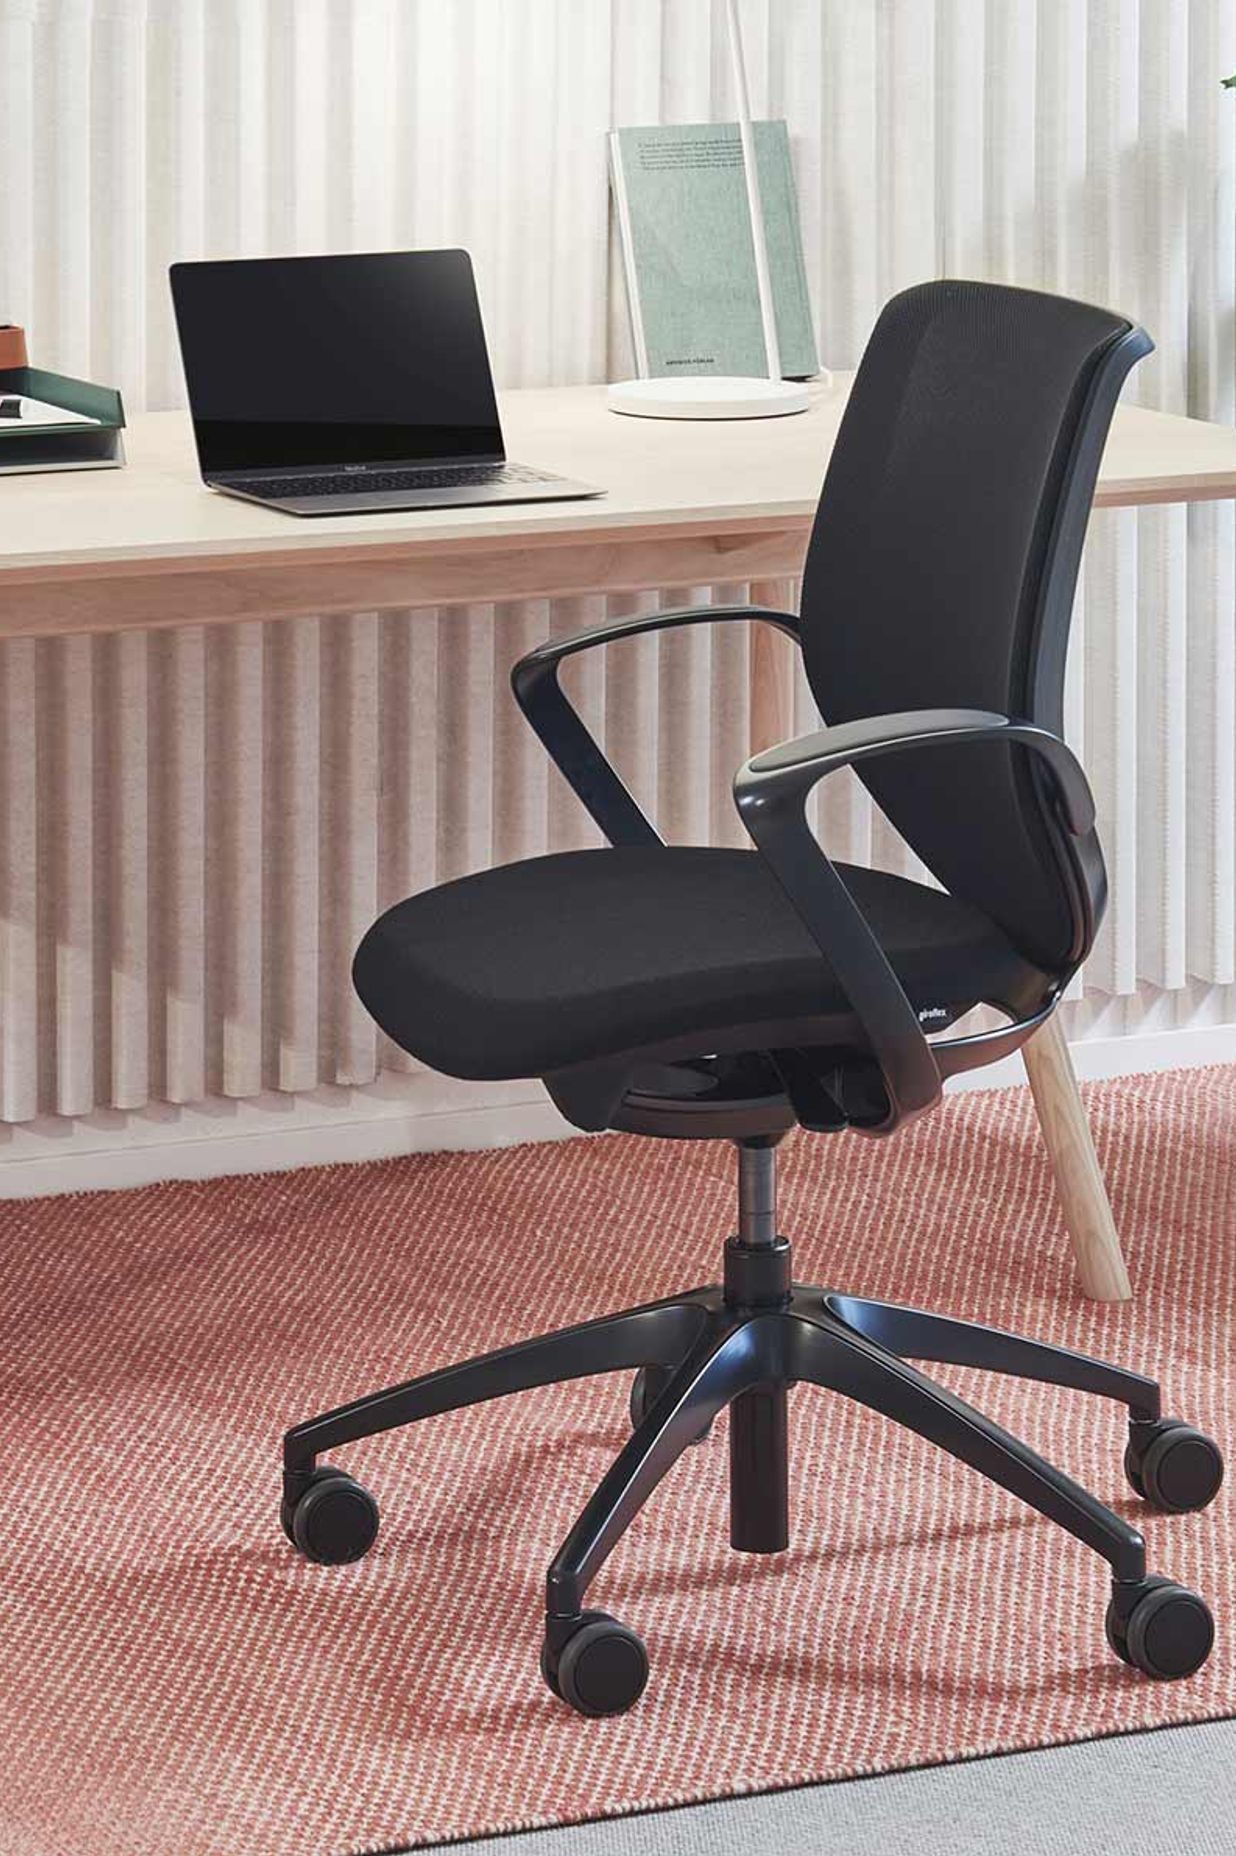 The Giroflex 313 has equally adjustable elements, with a synchronised seat mechanism